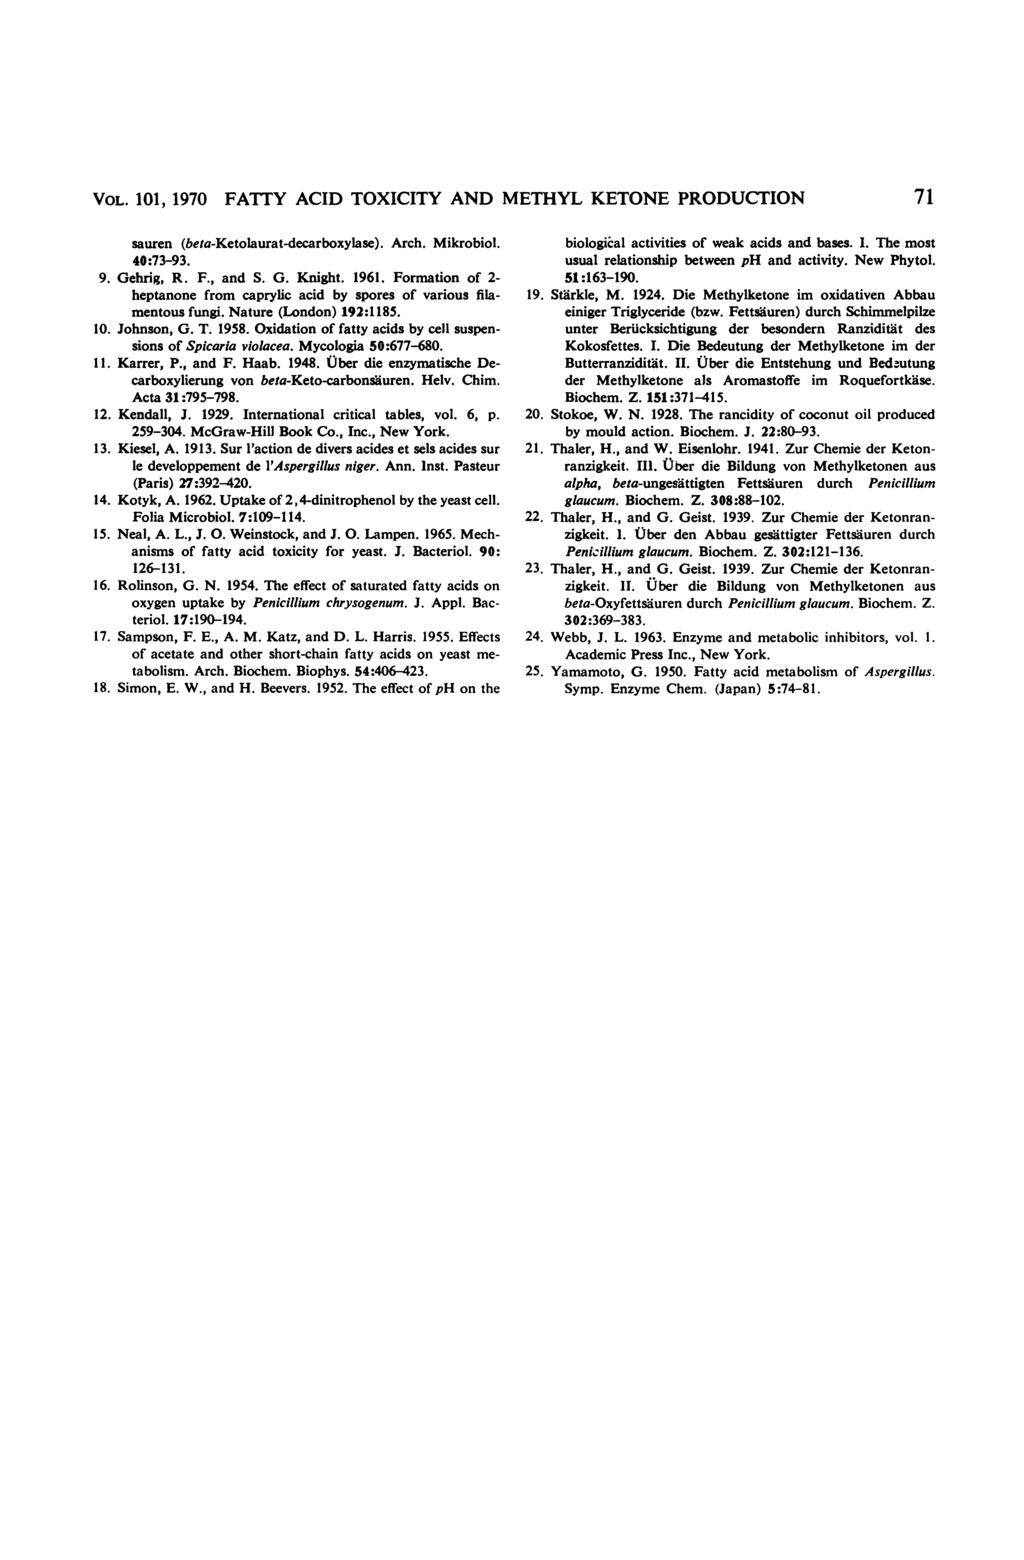 VOL. 11,197 FATTY ACID TOXICITY AND METHYL KETONE PRODUCTION 71 sauren (beta-ketolaurat-decarboxylase). Arch. Mikrobiol. 4:73-93. 9. Gehrig, R. F., and S. G. Knight. 1961.